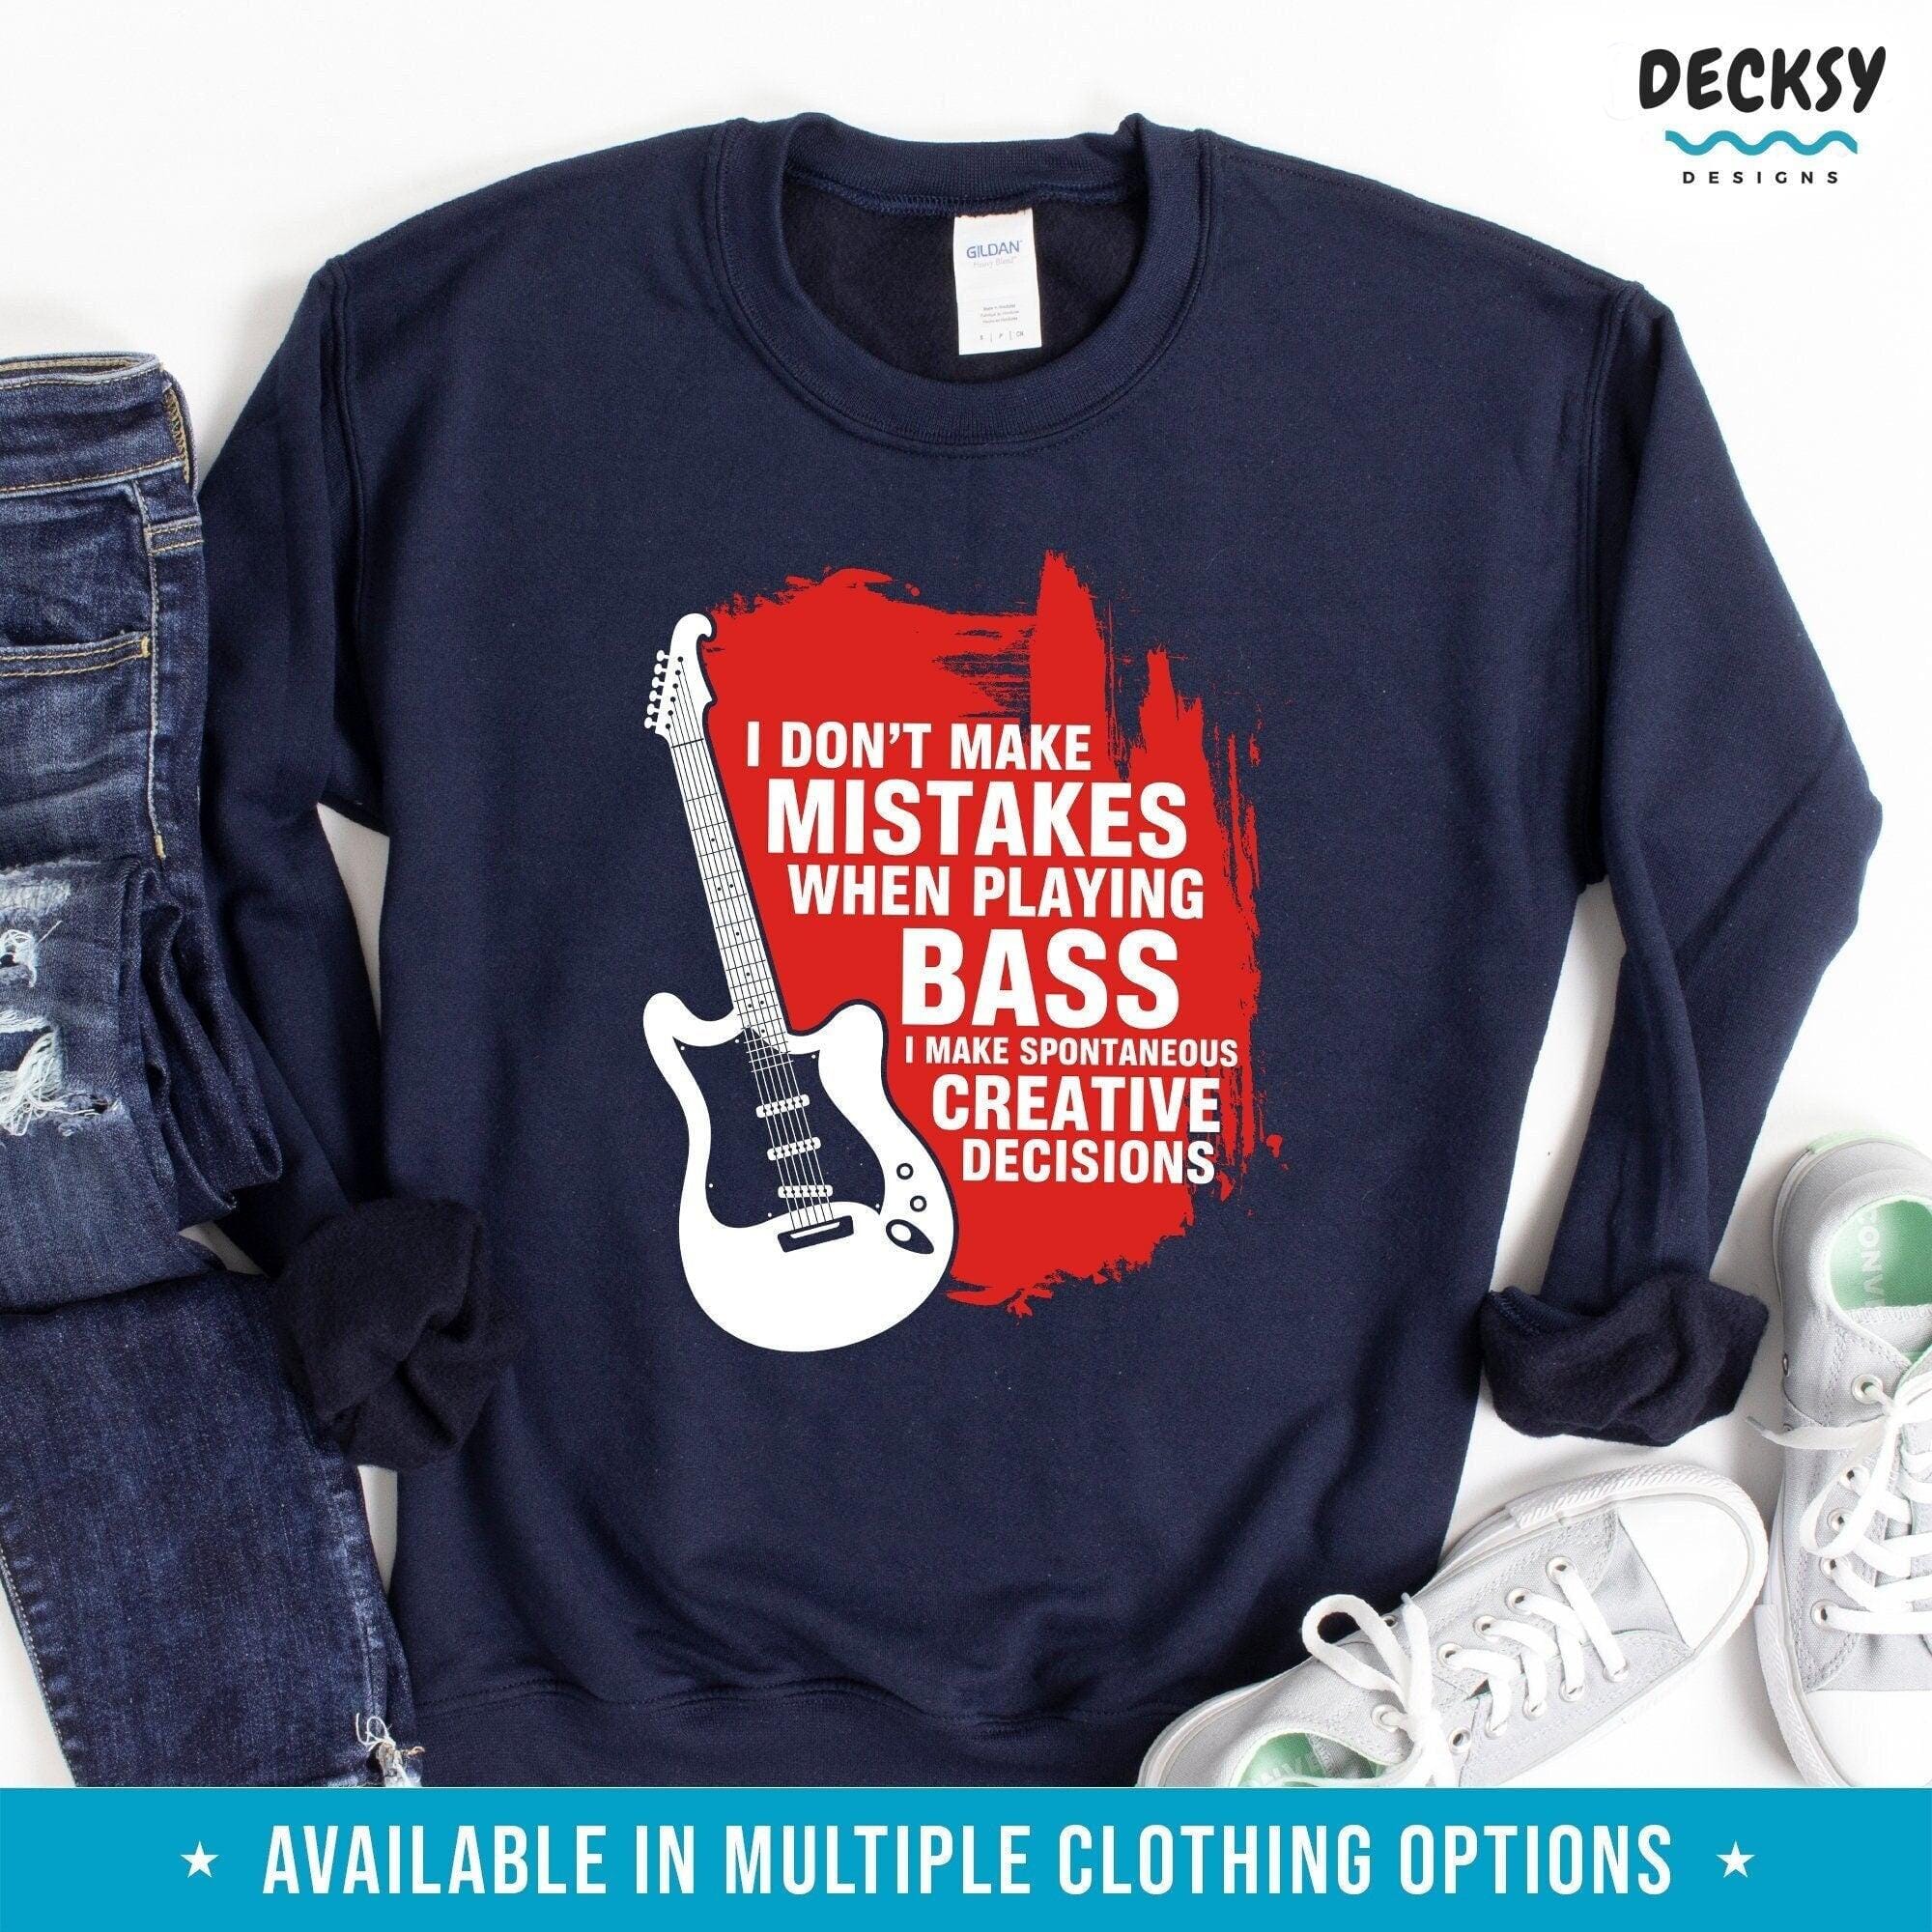 Bass Guitar Player Tshirt, Gift for Bassist-Clothing:Gender-Neutral Adult Clothing:Tops & Tees:T-shirts:Graphic Tees-DecksyDesigns